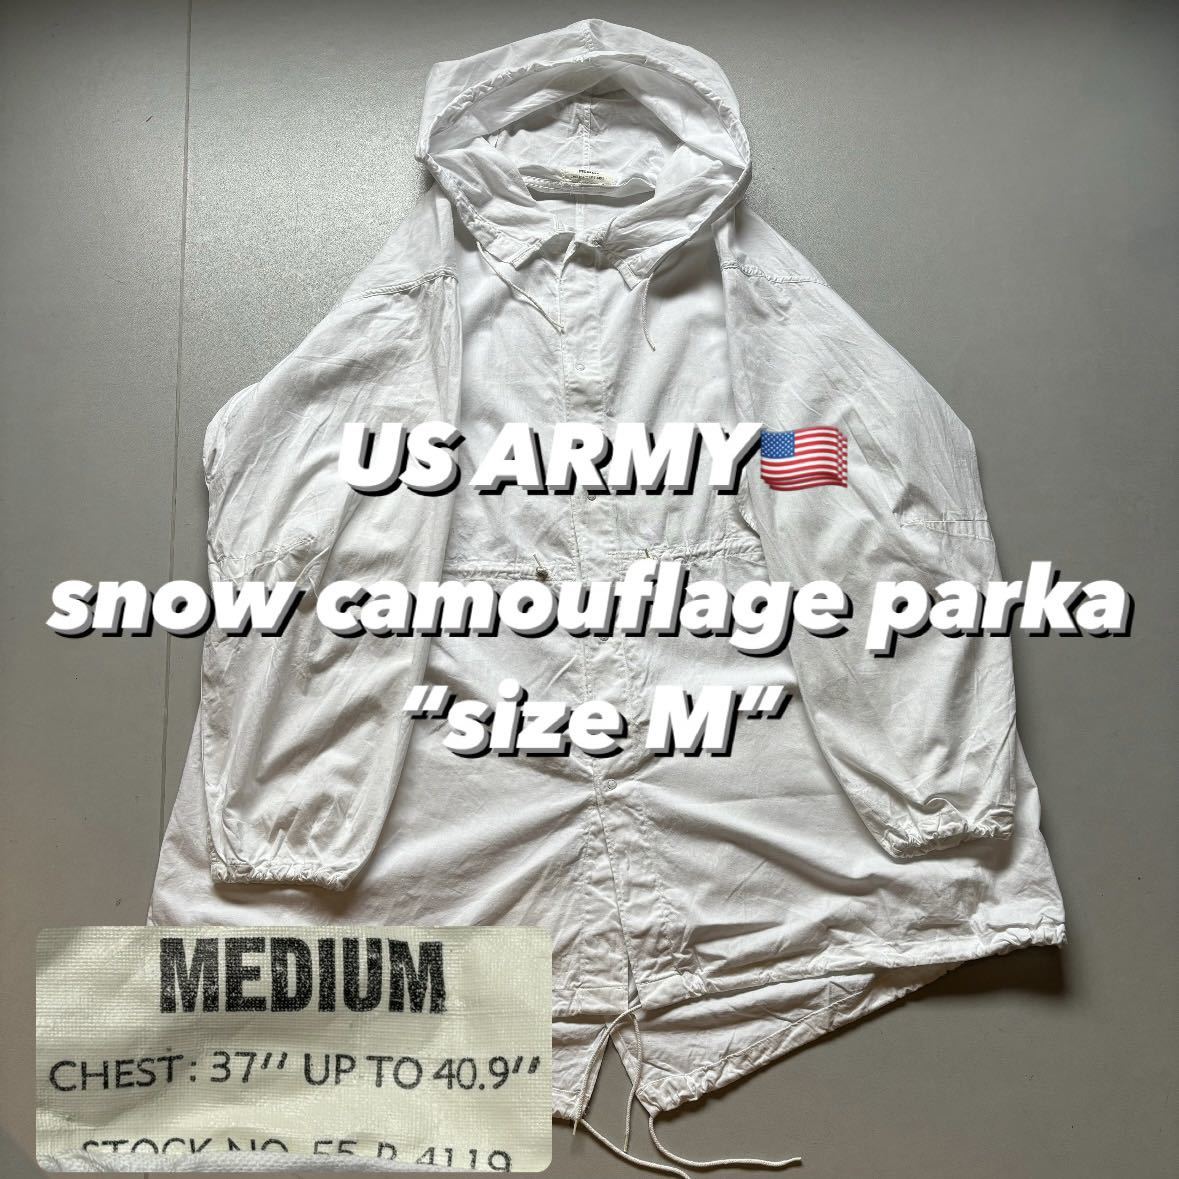 US army snow camouflage parka “size M” アメリカ軍 スノーカモパーカー 山岳部隊_画像1